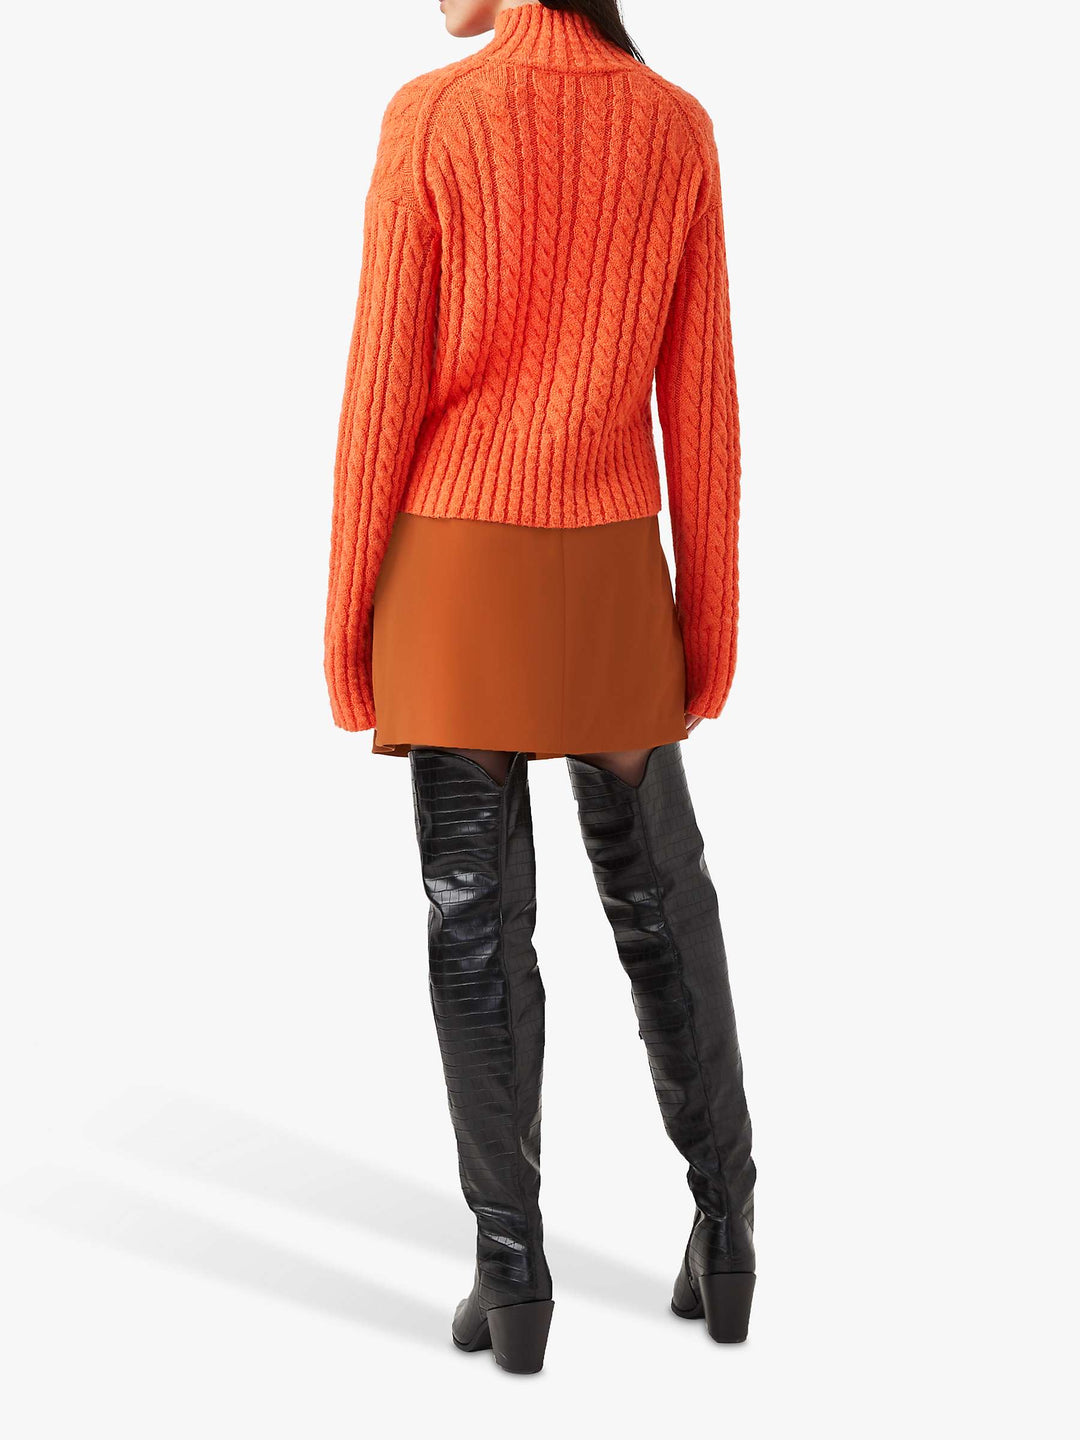 Jacqueline Cable Knit Sweater